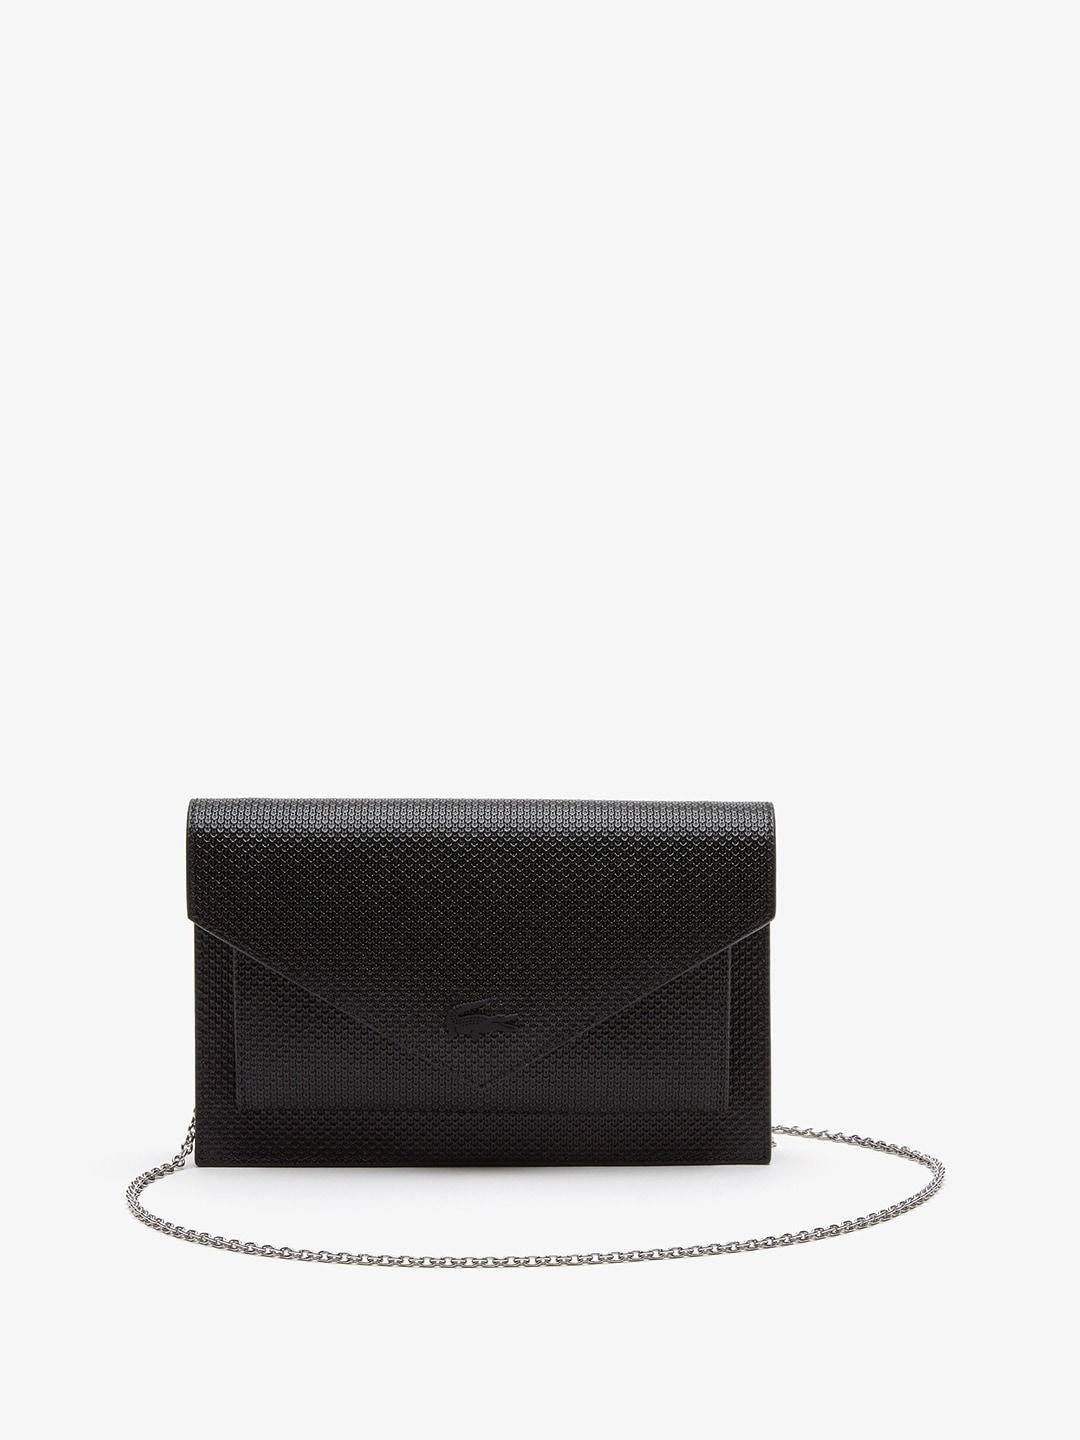 lacoste chantaco smooth leather envelope clutch